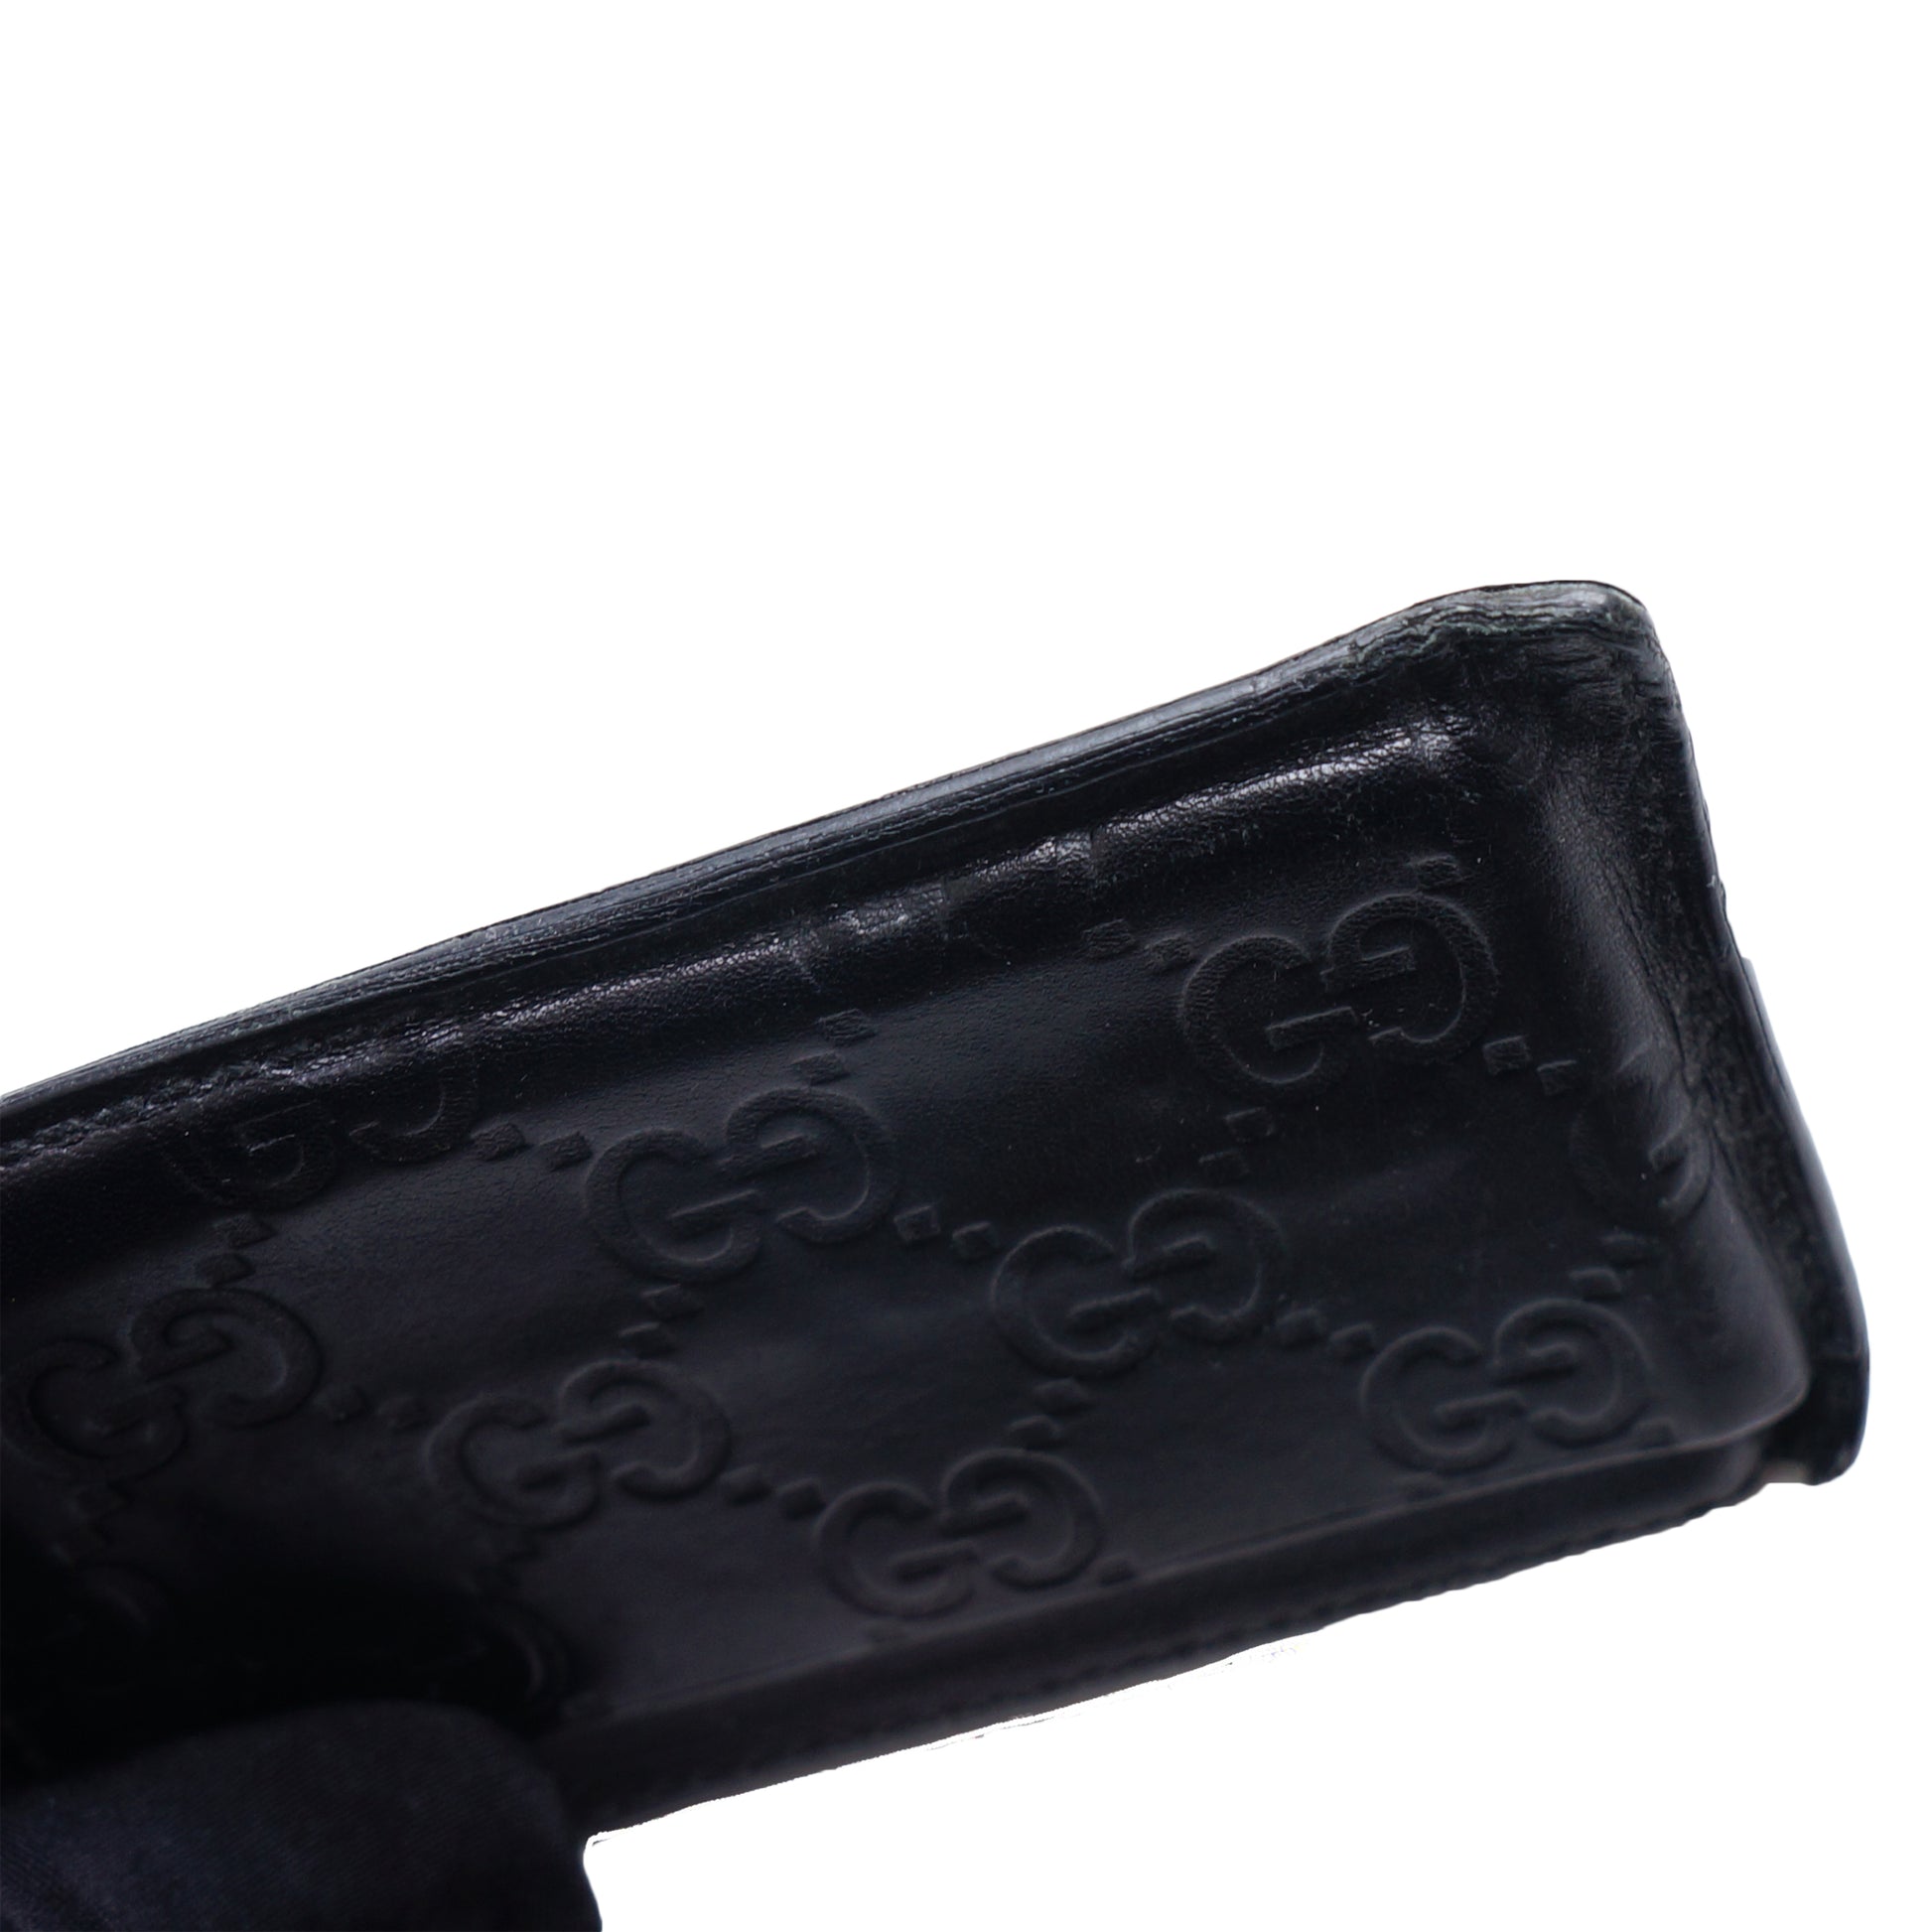 GUCCI GG GUCCISSIMA CREDIT CARD LEATHER HOLDER - leefluxury.com